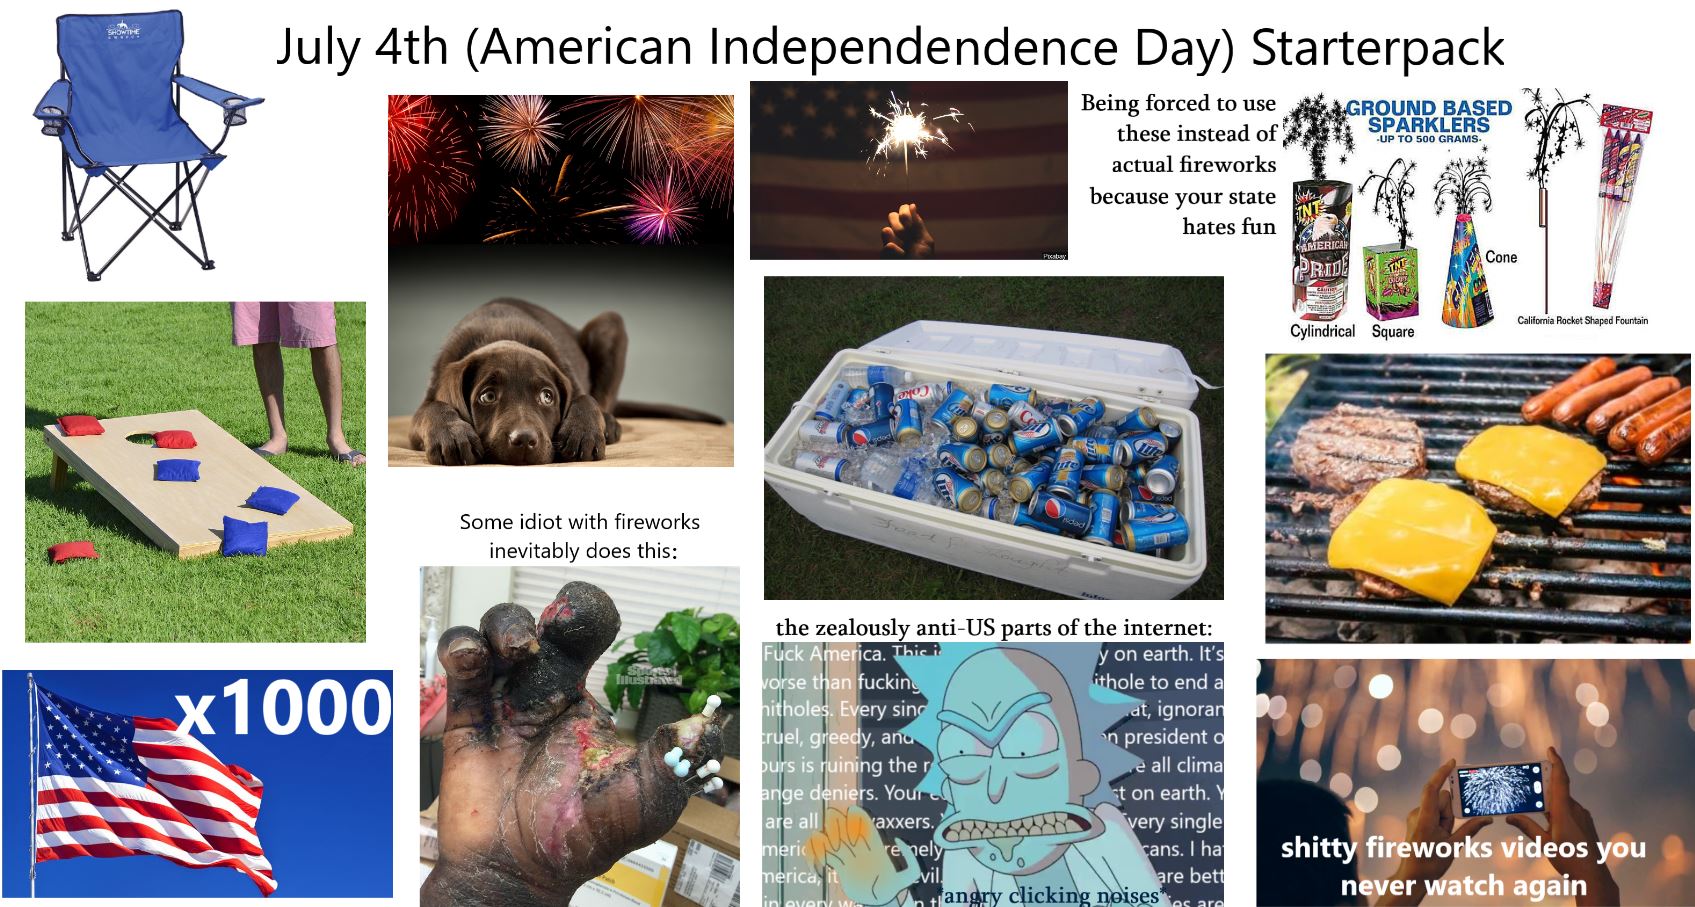 Starter Pack Meme - July 4th American Independendence Day Starterpack Ground Based Sparklers Up To 500 Grams. Being forced to use these instead of actual fireworks because your state hates fun California Rocket Shaped Fountain Cylindrical Square Some idio